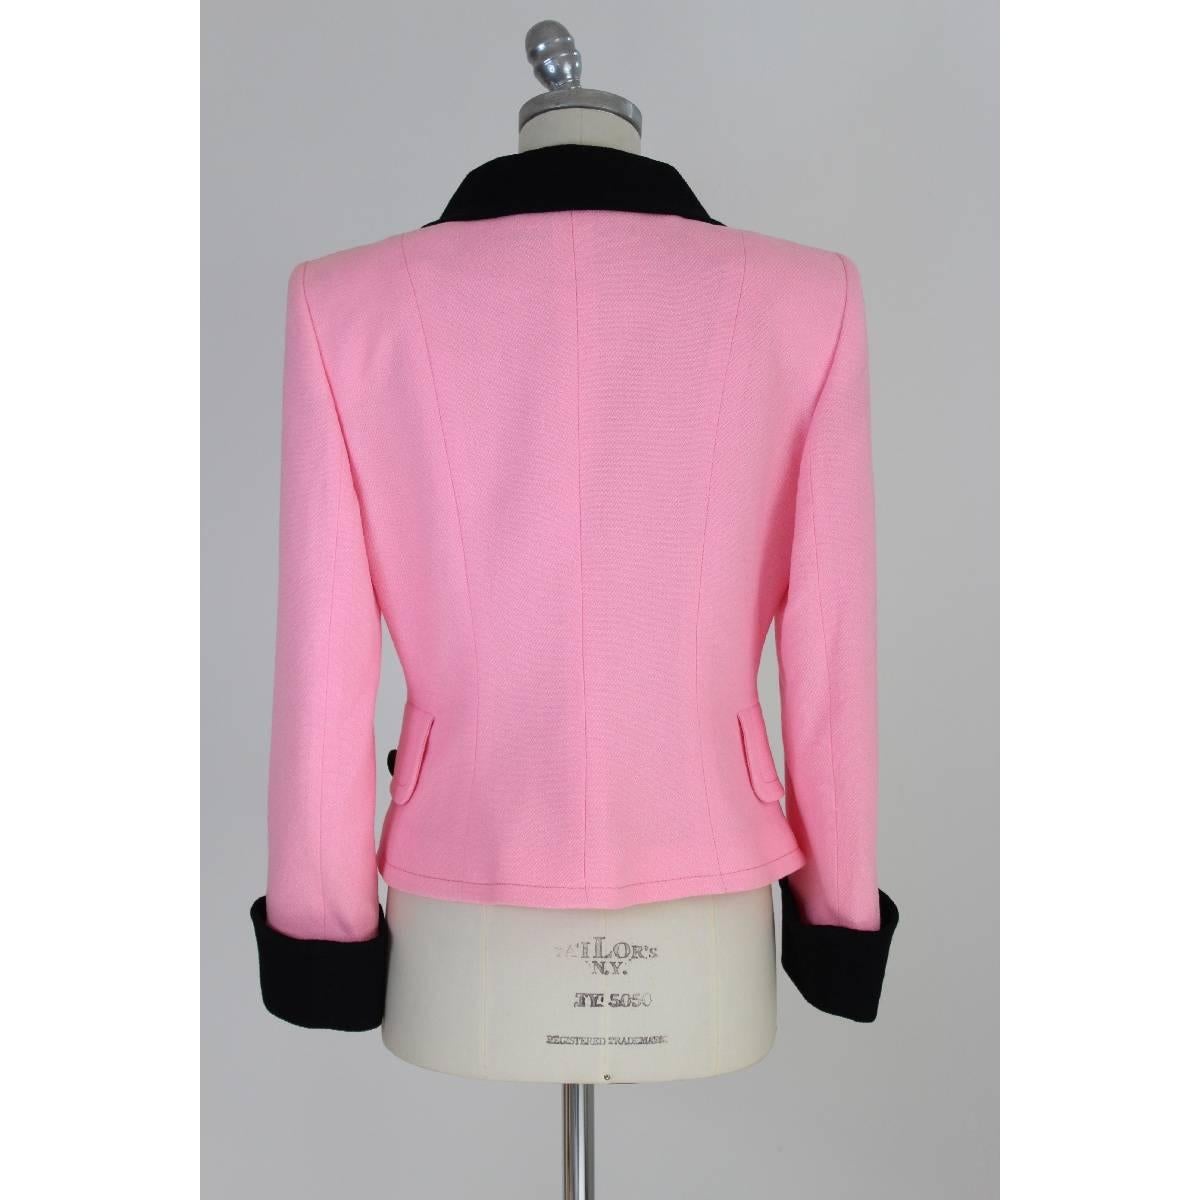 Mario Borsato Couture vintage blazer jacket. Pink with black neck and cuffs. Wool 80% and 20% nylon, made in italy size 44. New with tag

Size 42 It 8 Us 10 Uk

Shoulders: 44 cm
Chest / Bust: 49 cm
Sleeves: 60 cm
Length: 62 cm

Color: pink and